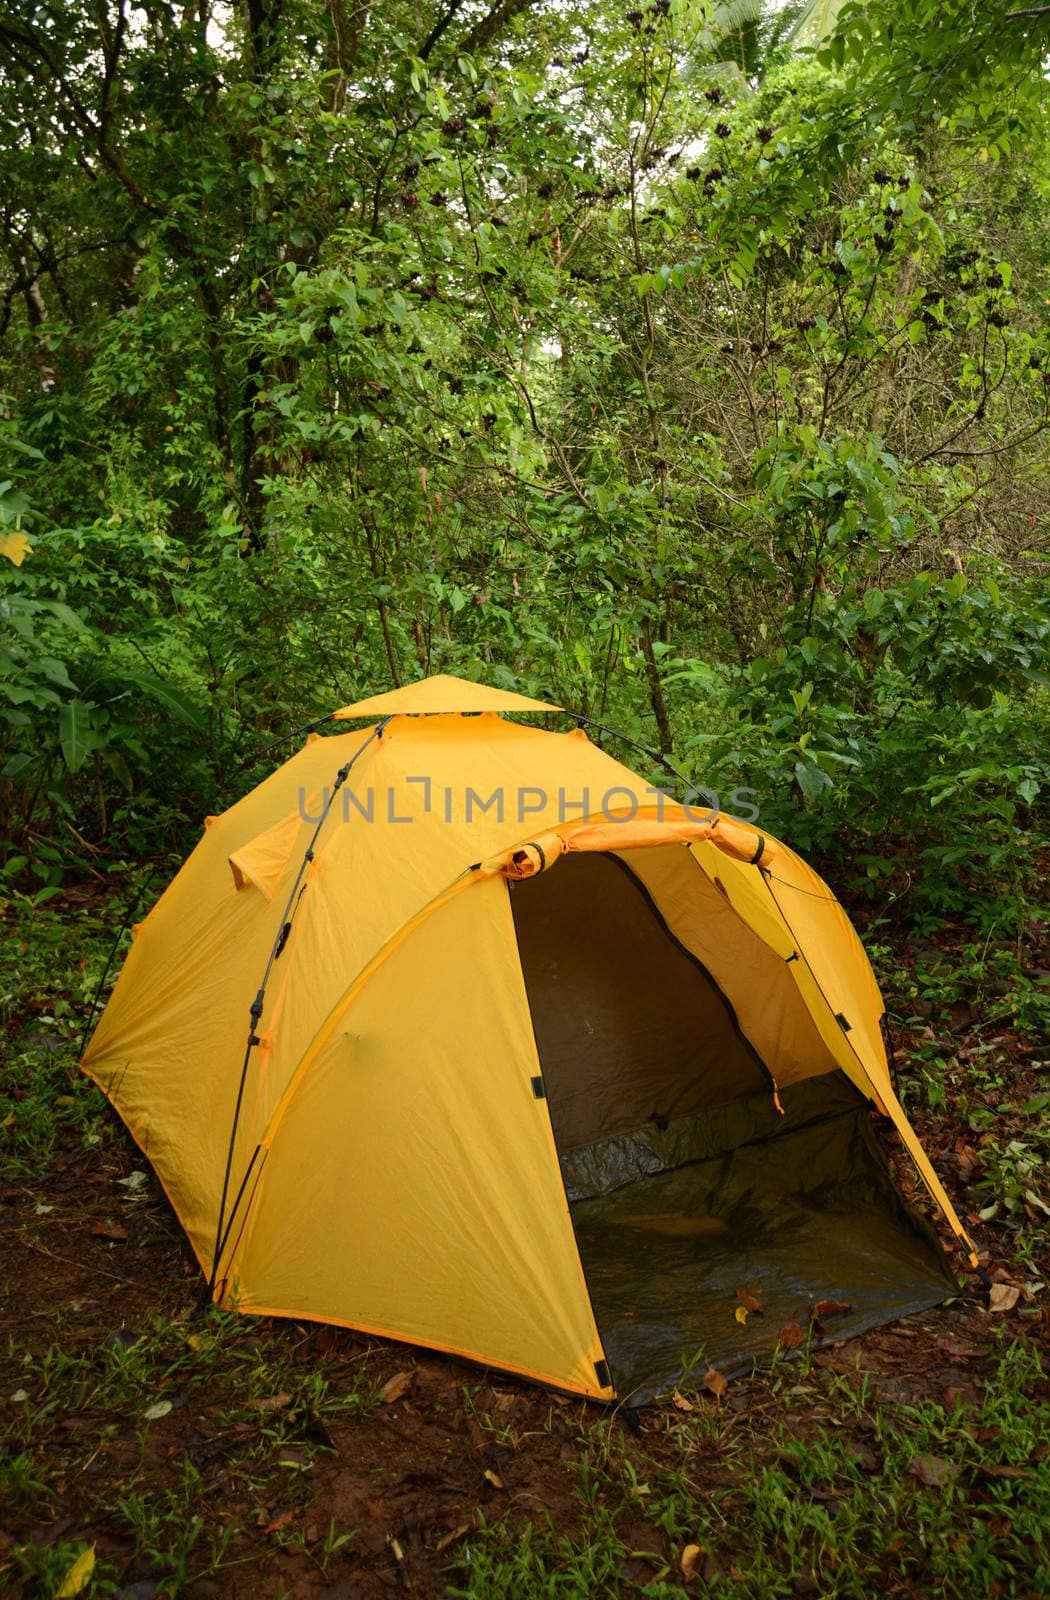 Camping with a yellow tent in the wilderness in Central America